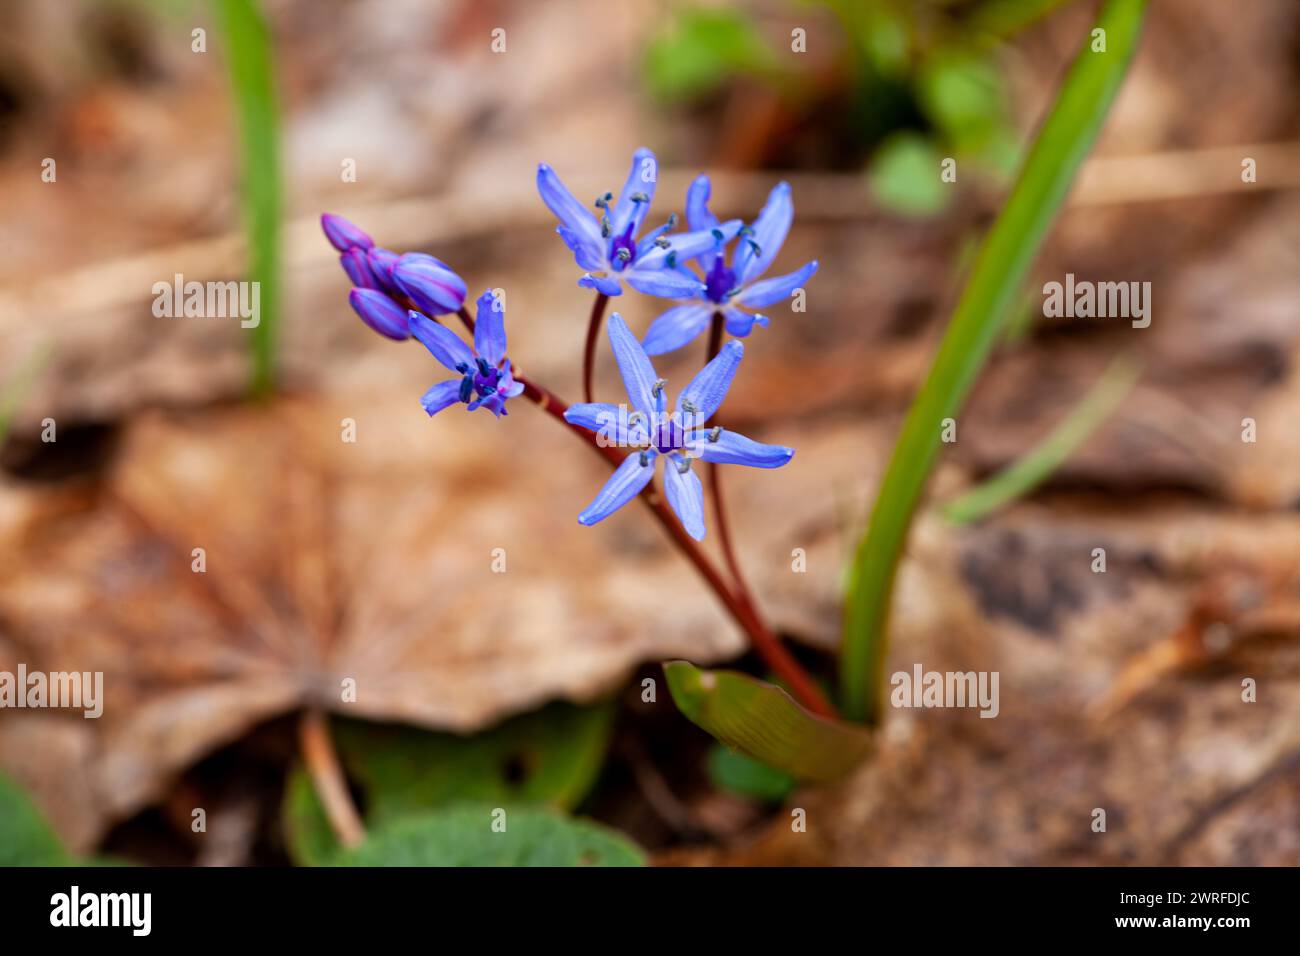 A small terrestrial plant with electric blue petals is blooming in the grass, showcasing the beauty of herbaceous and flowering plants up close Stock Photo